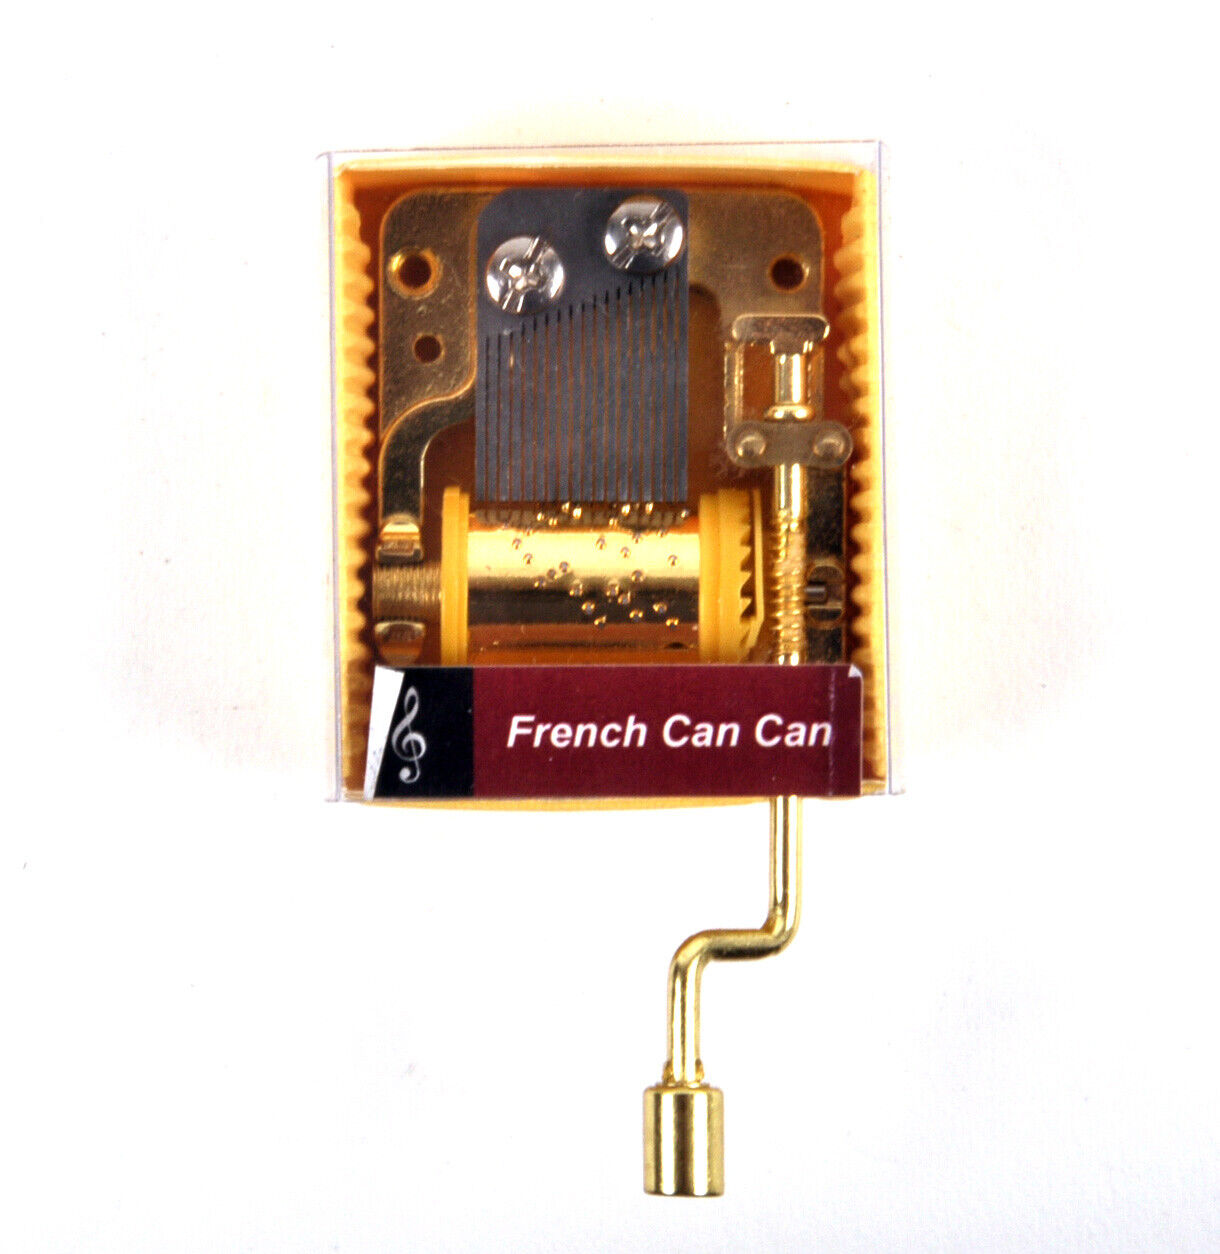 French Can - Handcrank Music Box